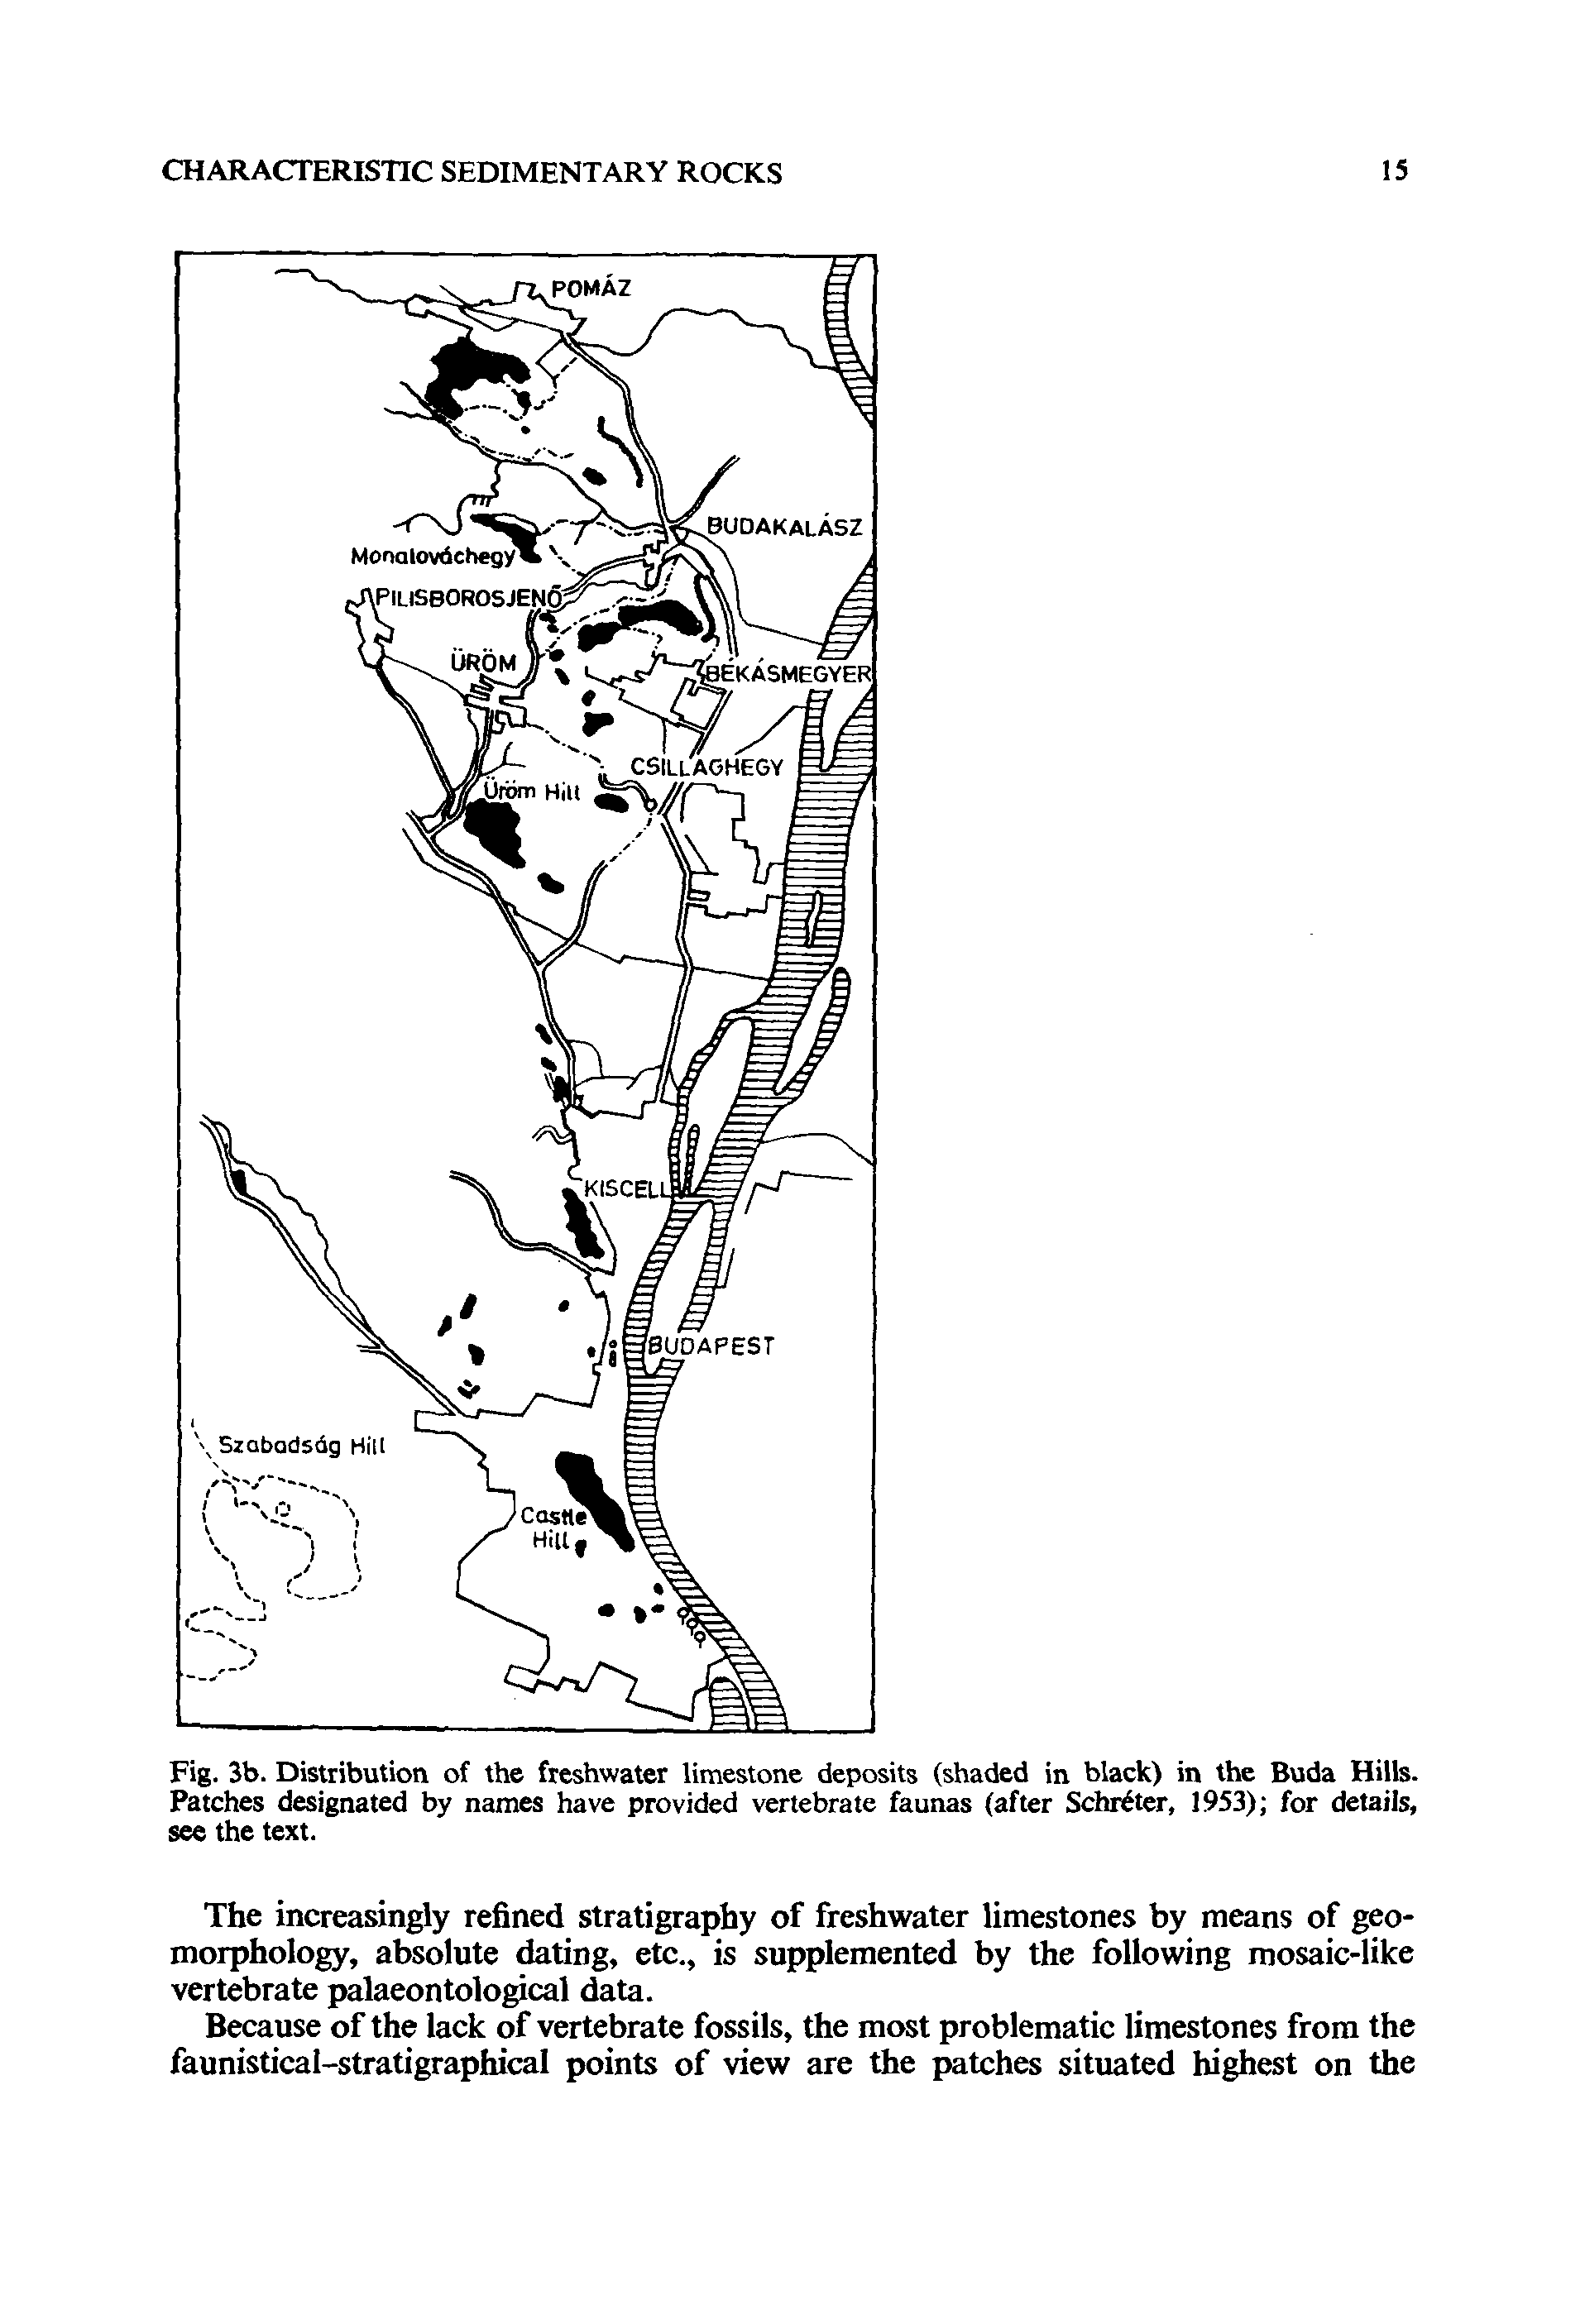 Fig. 3b. Distribution of the freshwater limestone deposits (shaded in black) in the Buda Hills. Patches designated by names have provided vertebrate faunas (after Schr ter, 1953) for details, see the text.